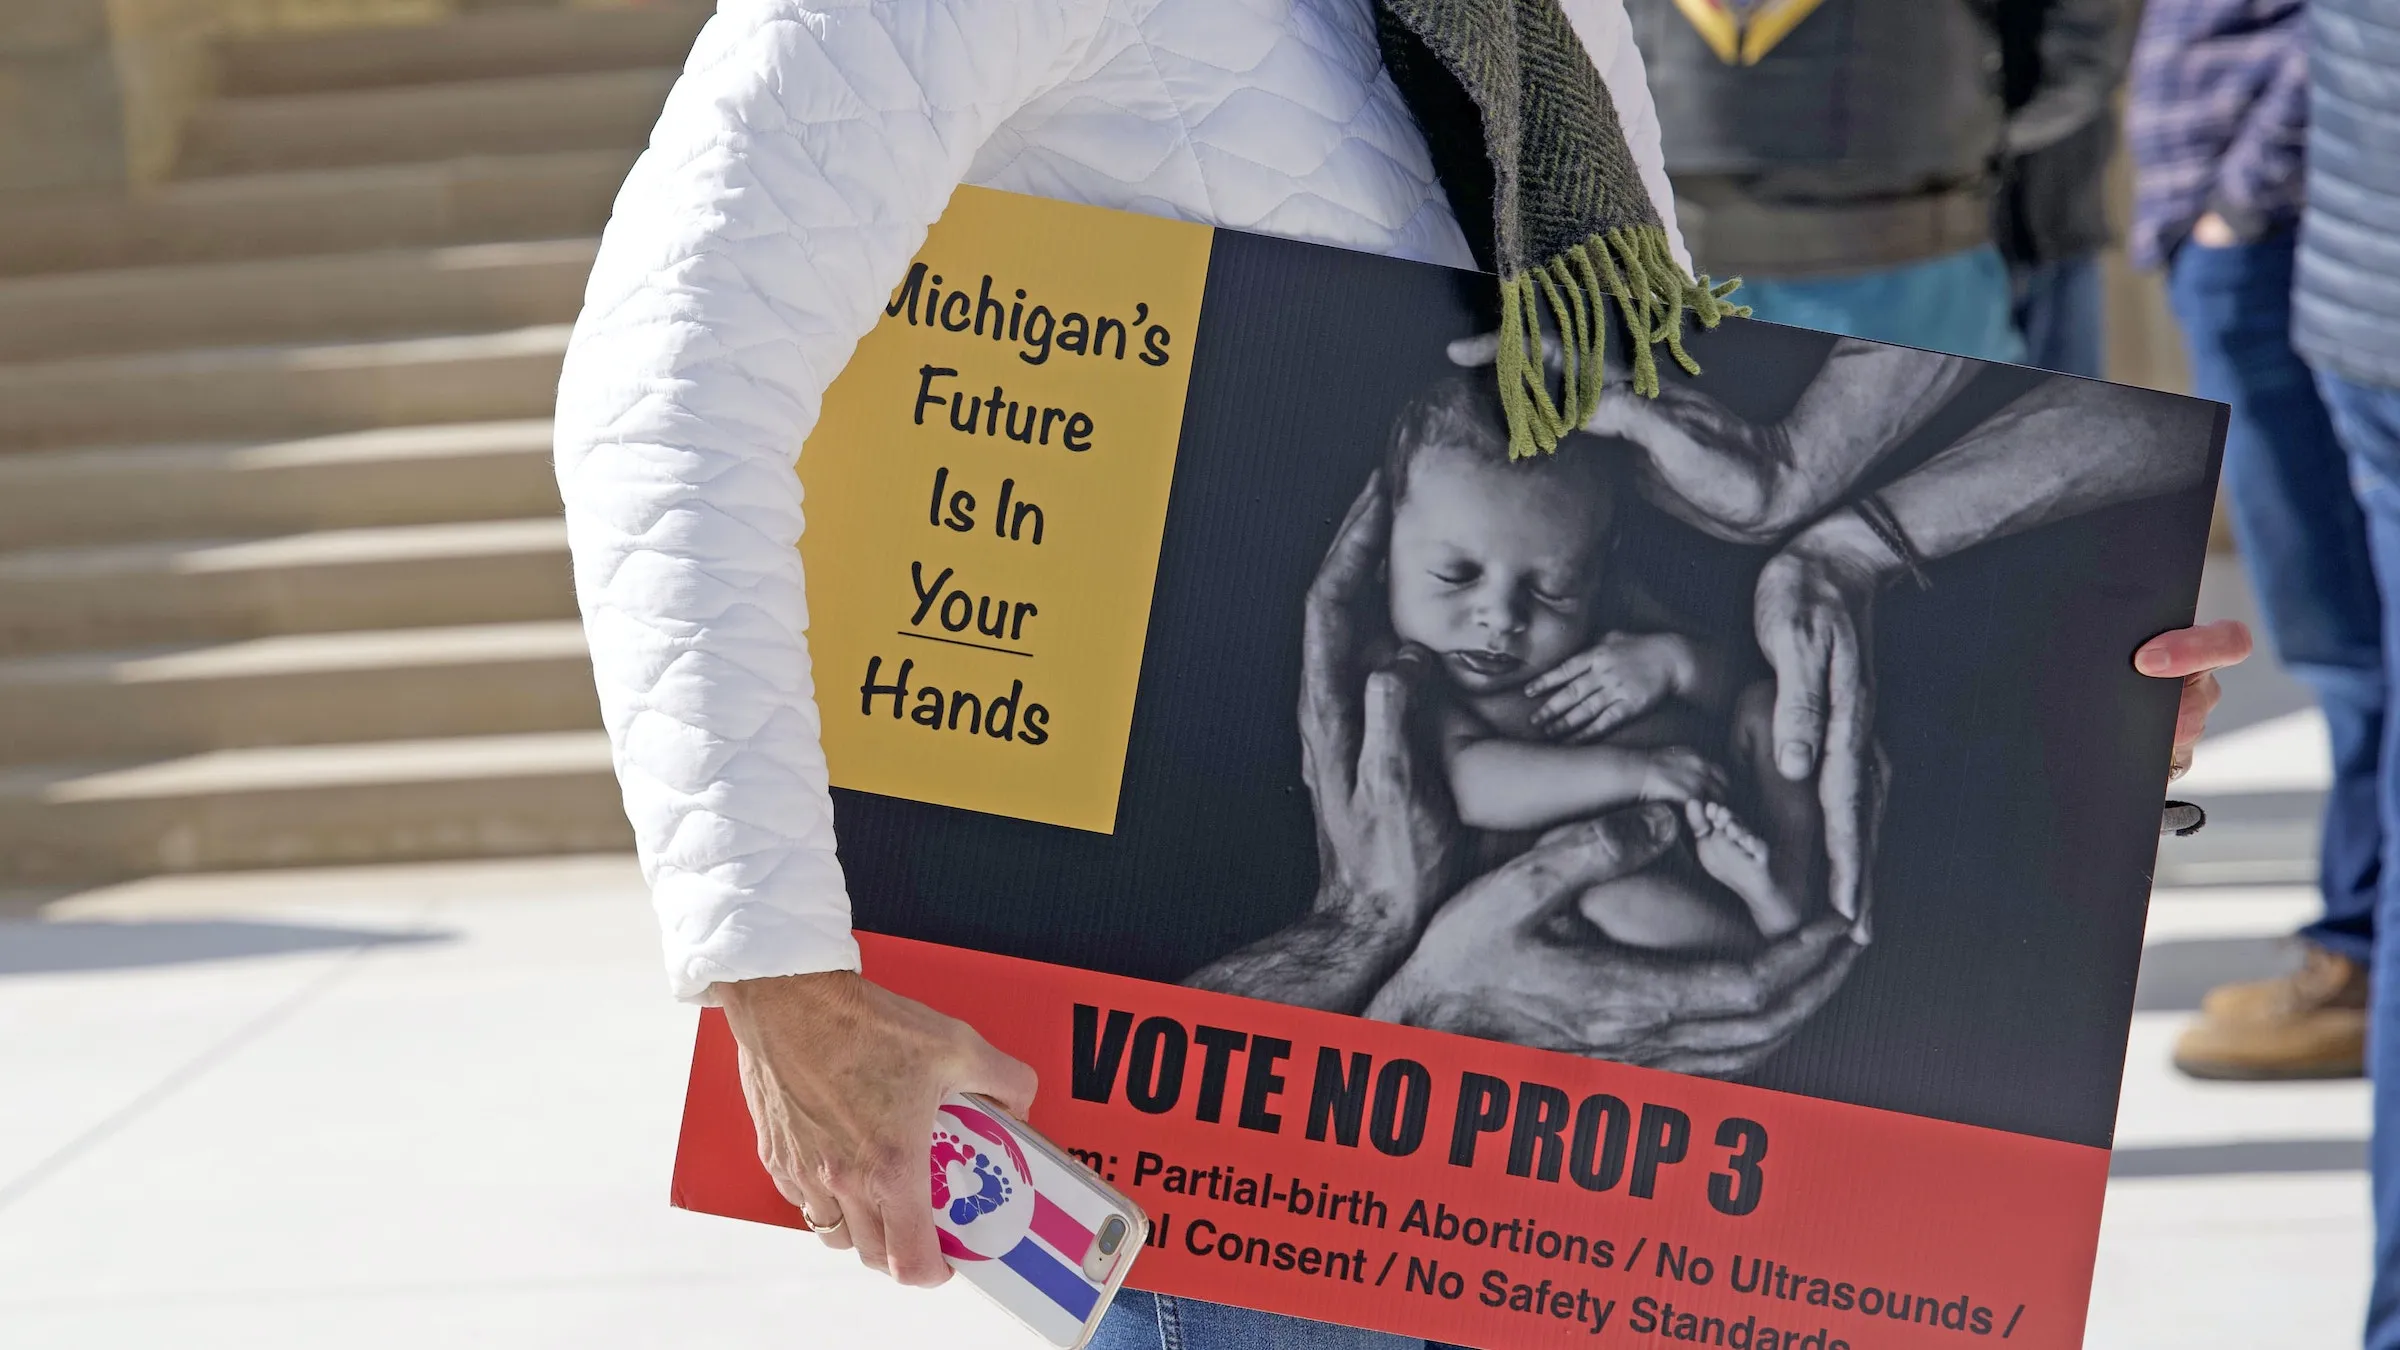 A woman carries a sign warning of the dangers of Proposal 3, the so-called "Reproductive Freedom for All" constitutional amendment, during an Oct. 15 rally at the state capitol building in Lansing. If the controversial proposal passes, it would mean the end of all abortion-related regulation in Michigan, including for children and minors.?w=200&h=150